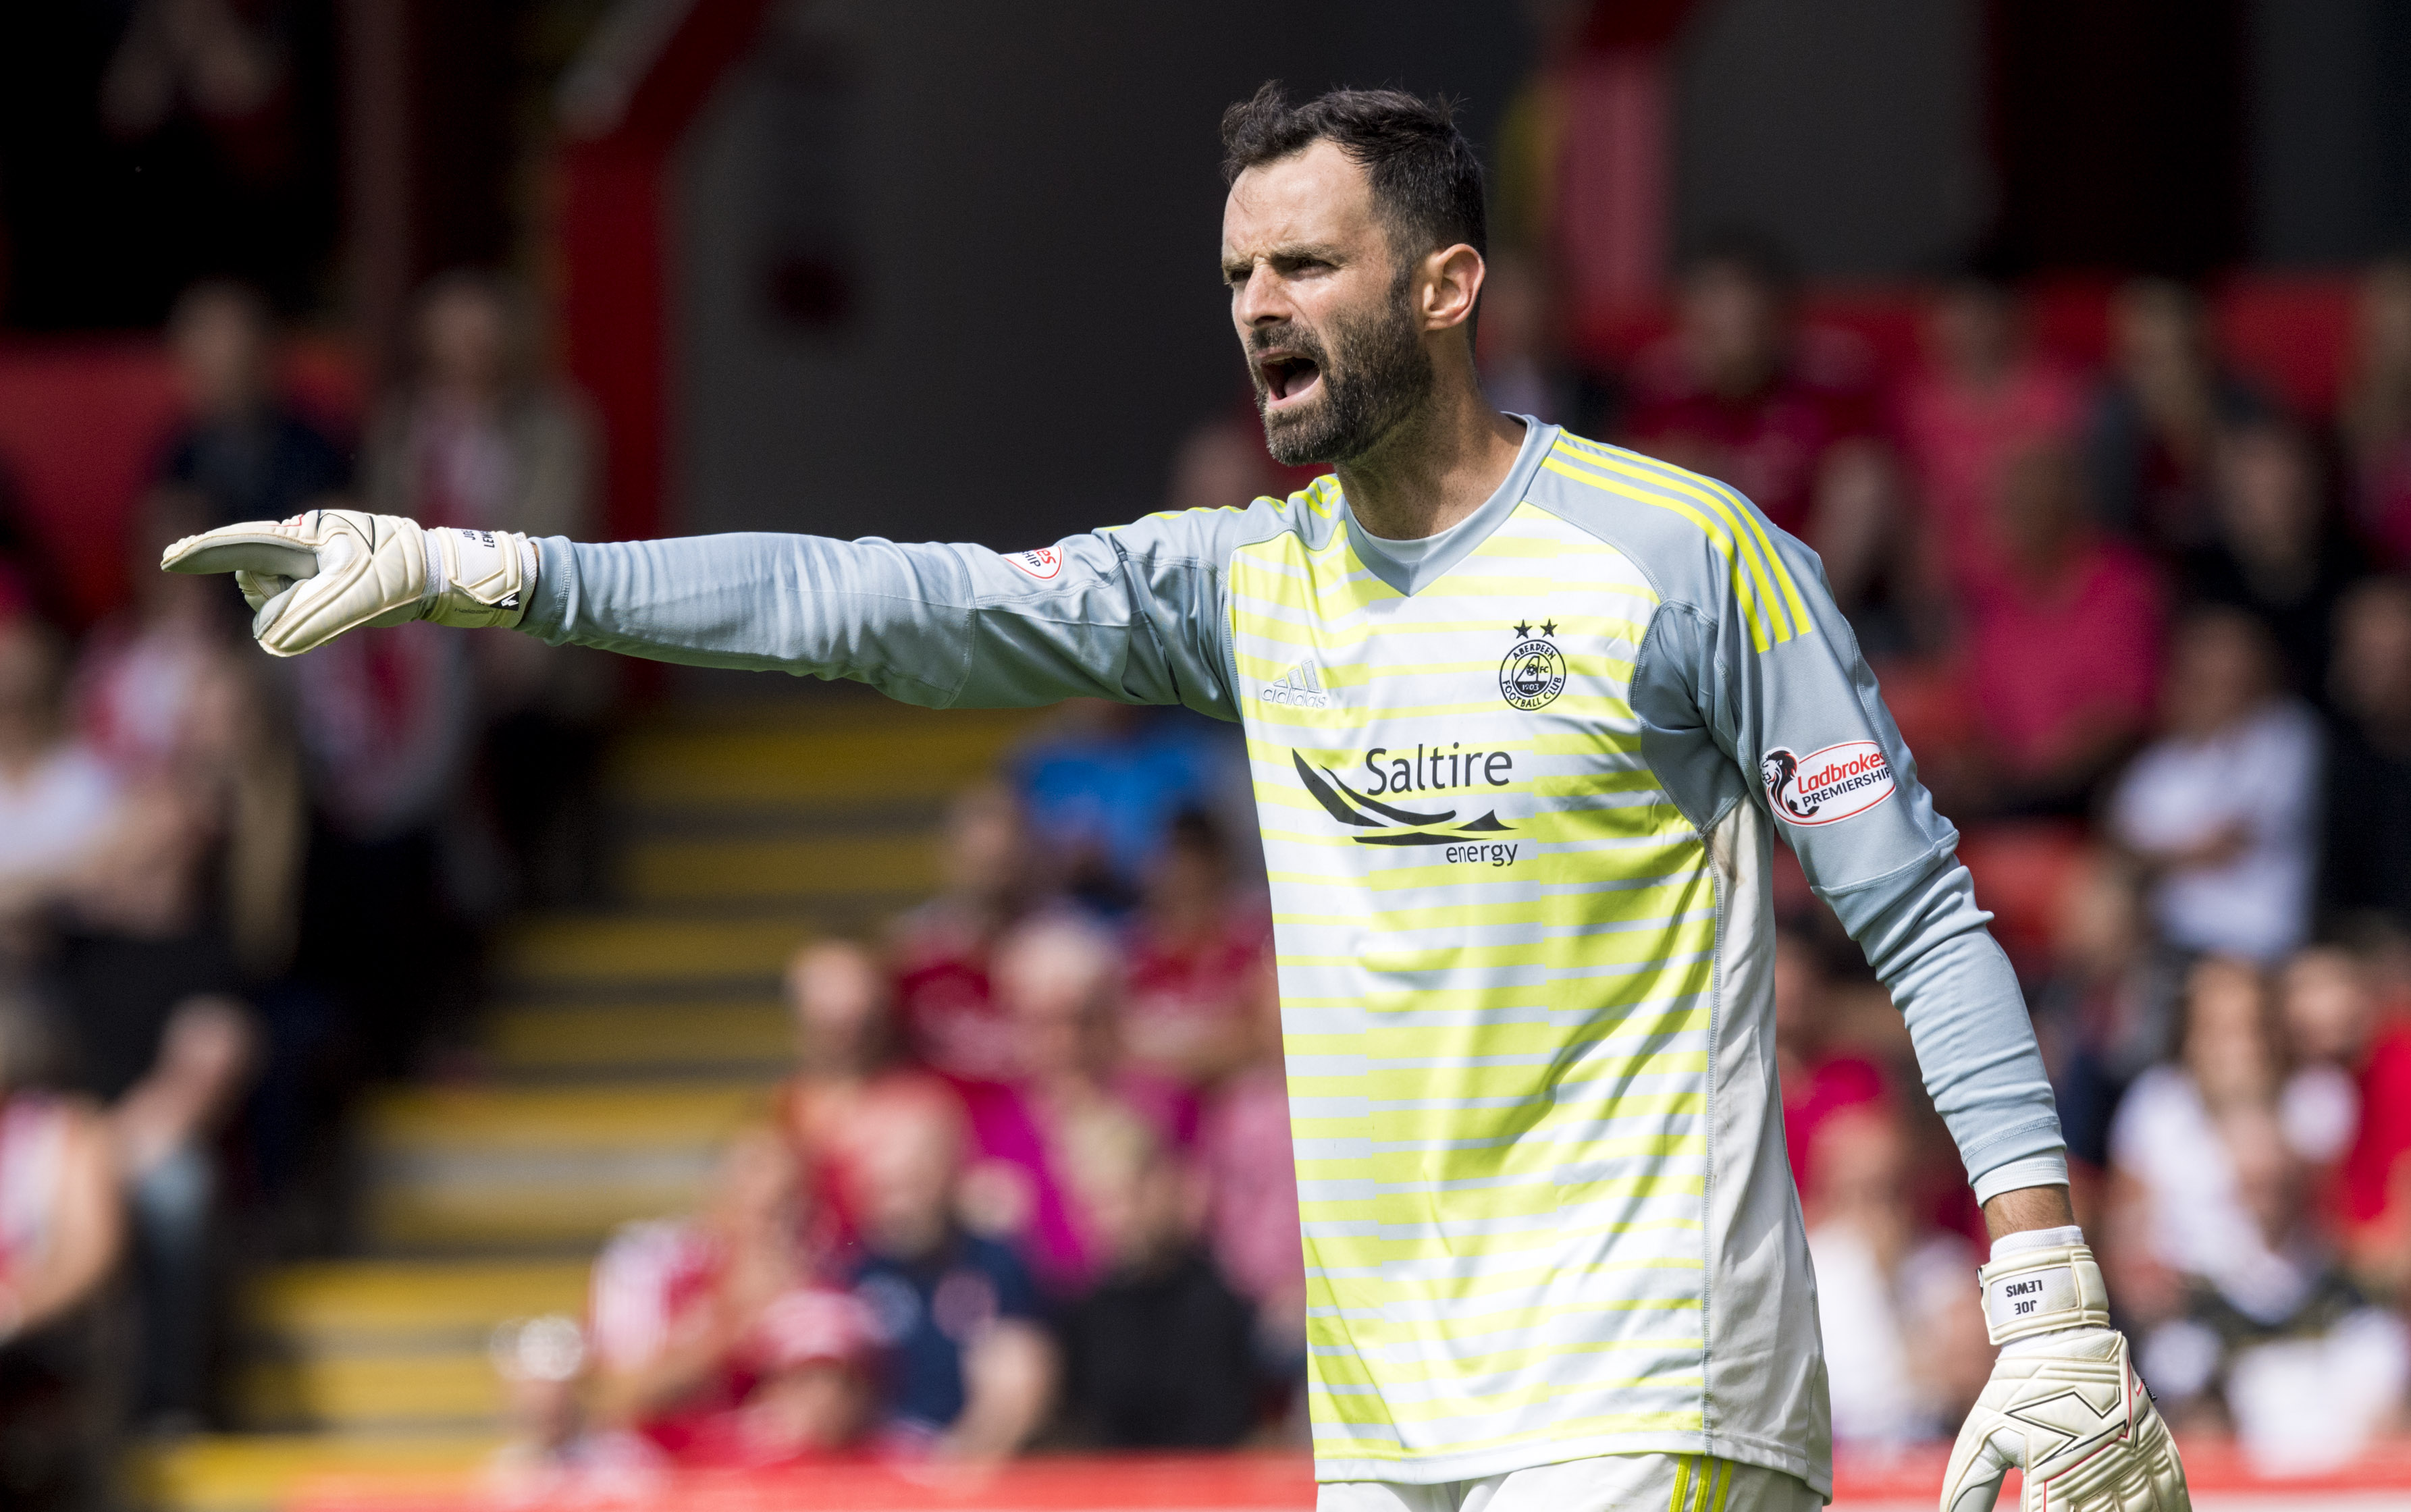 Sunday is win-at-all-costs for Aberdeen goalkeeper Joe Lewis.